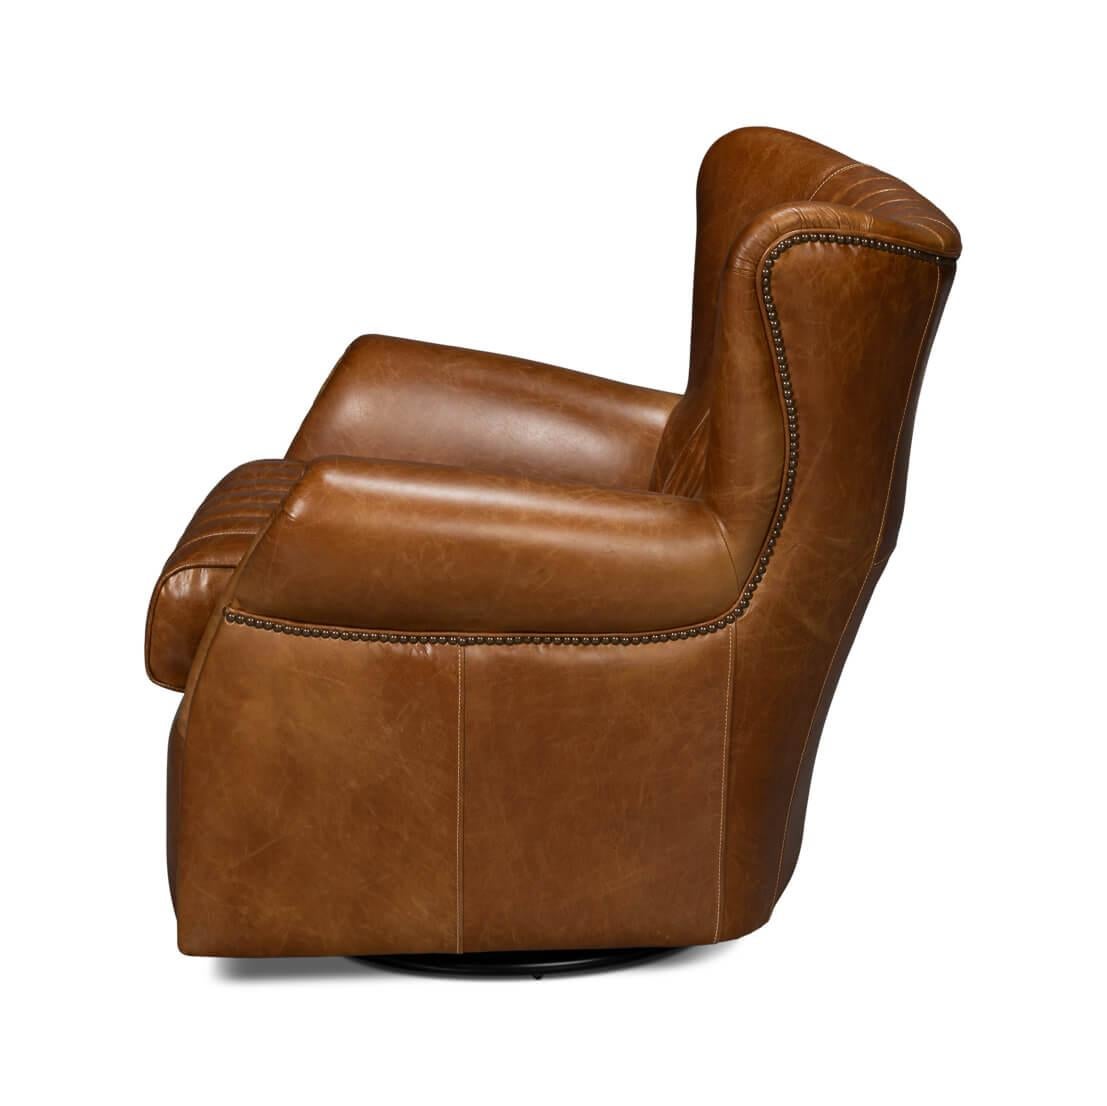 American Classical Classic Brown Leather Swivel Chair For Sale